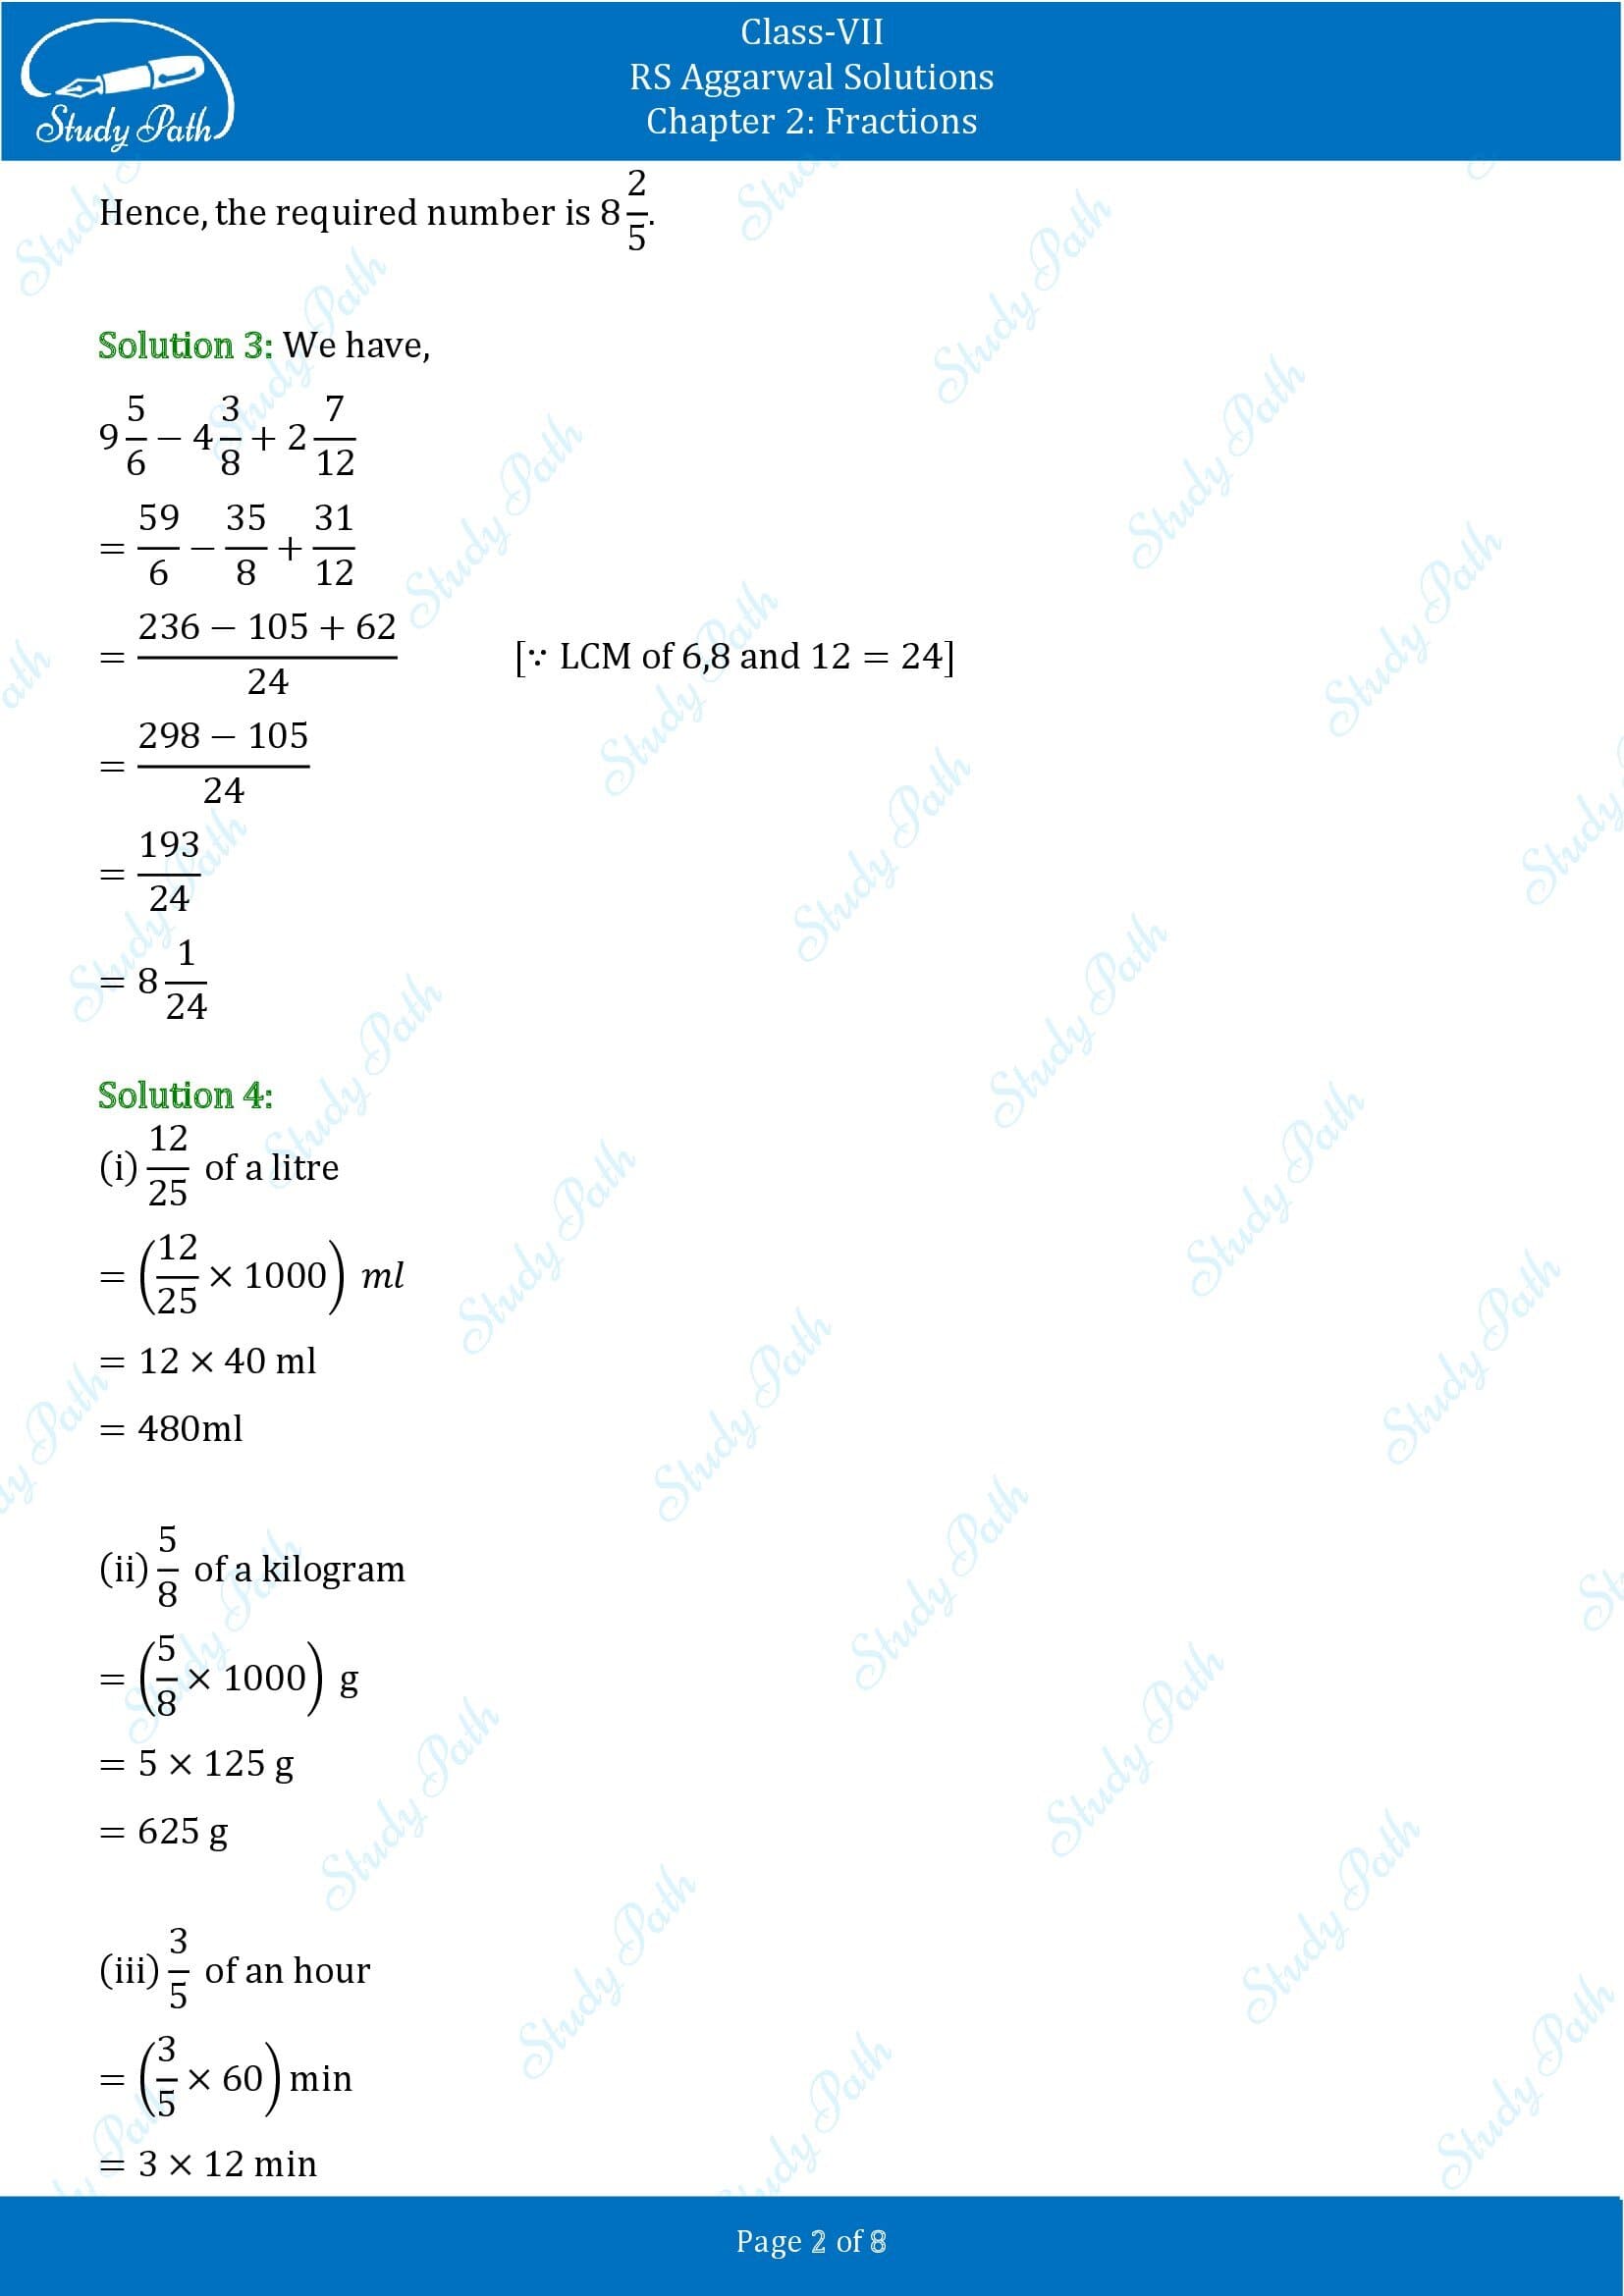 RS Aggarwal Solutions Class 7 Chapter 2 Fractions Test Paper 00002